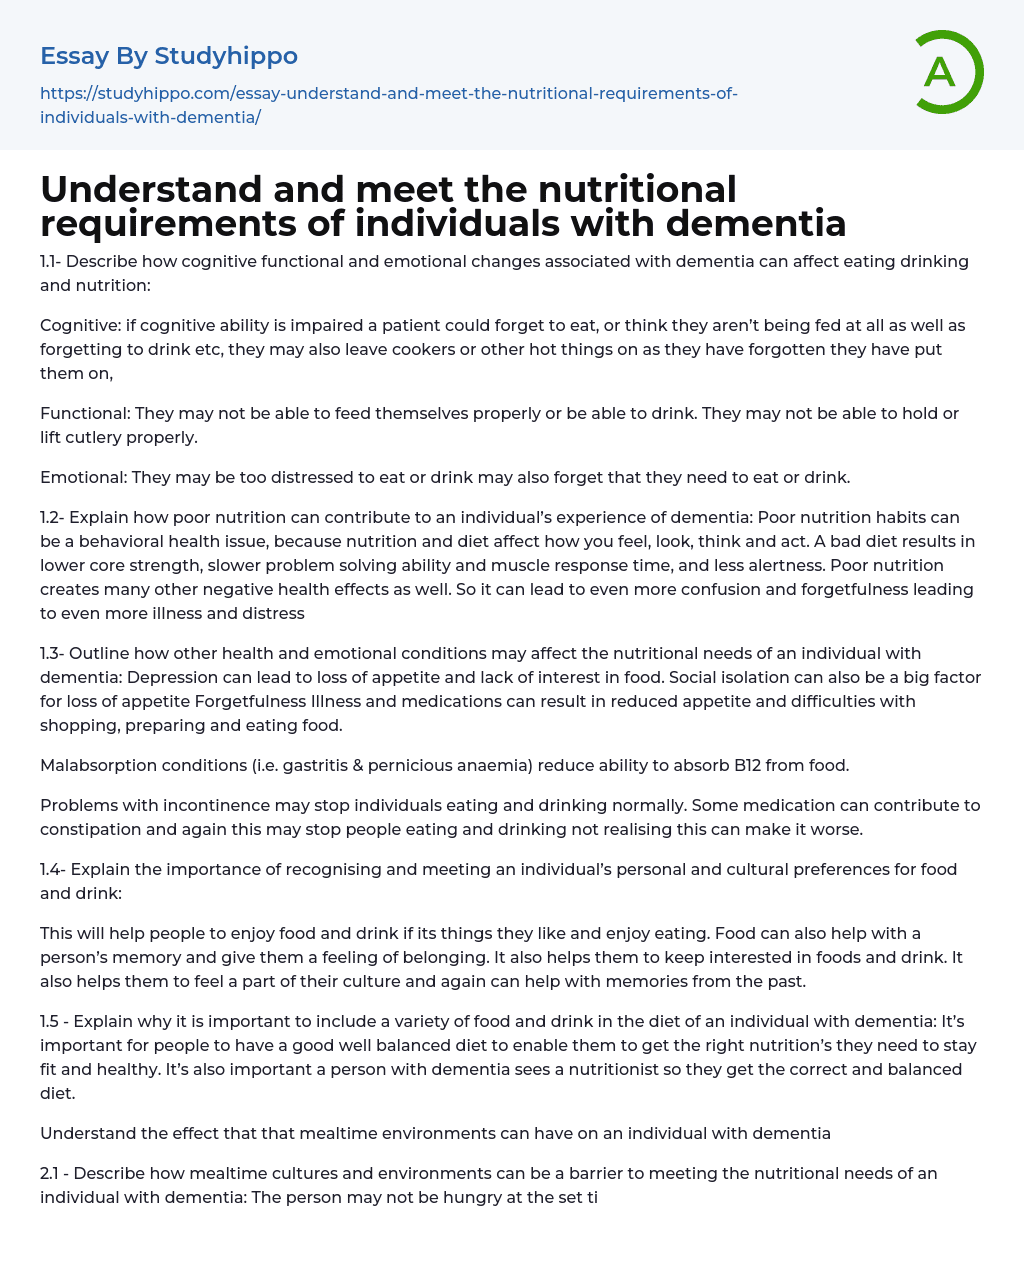 Understand and meet the nutritional requirements of individuals with dementia Essay Example